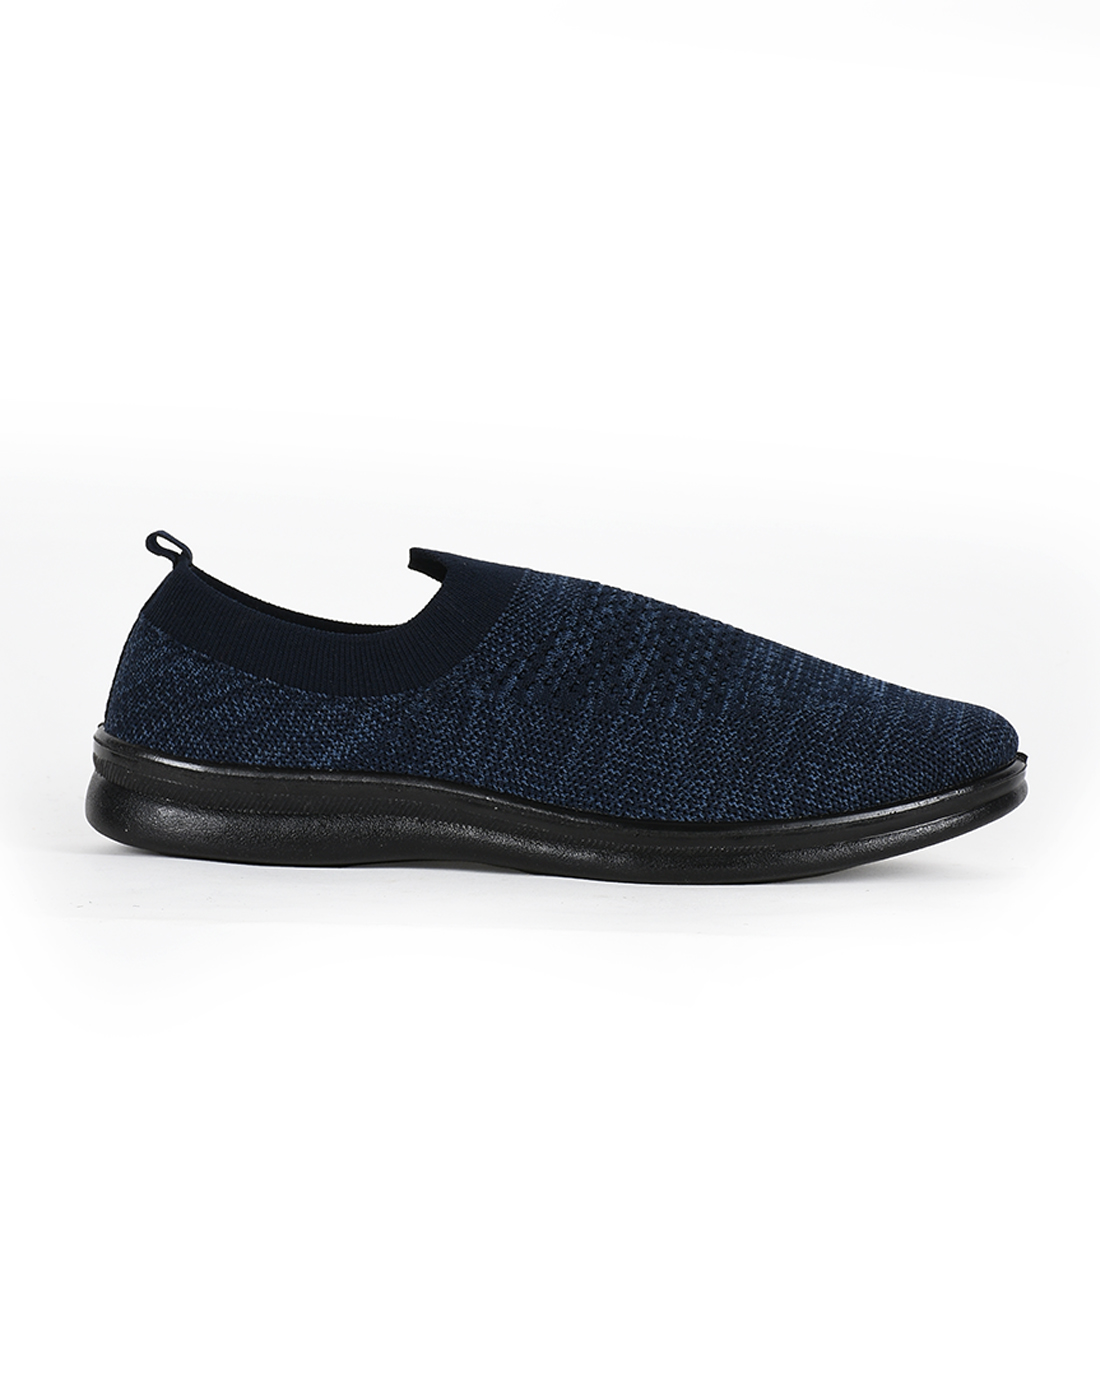 PARAGON Mens Self Design Casual Sneakers | Stylish, Comfortable and lightweight Slip-on Sneakers for Men